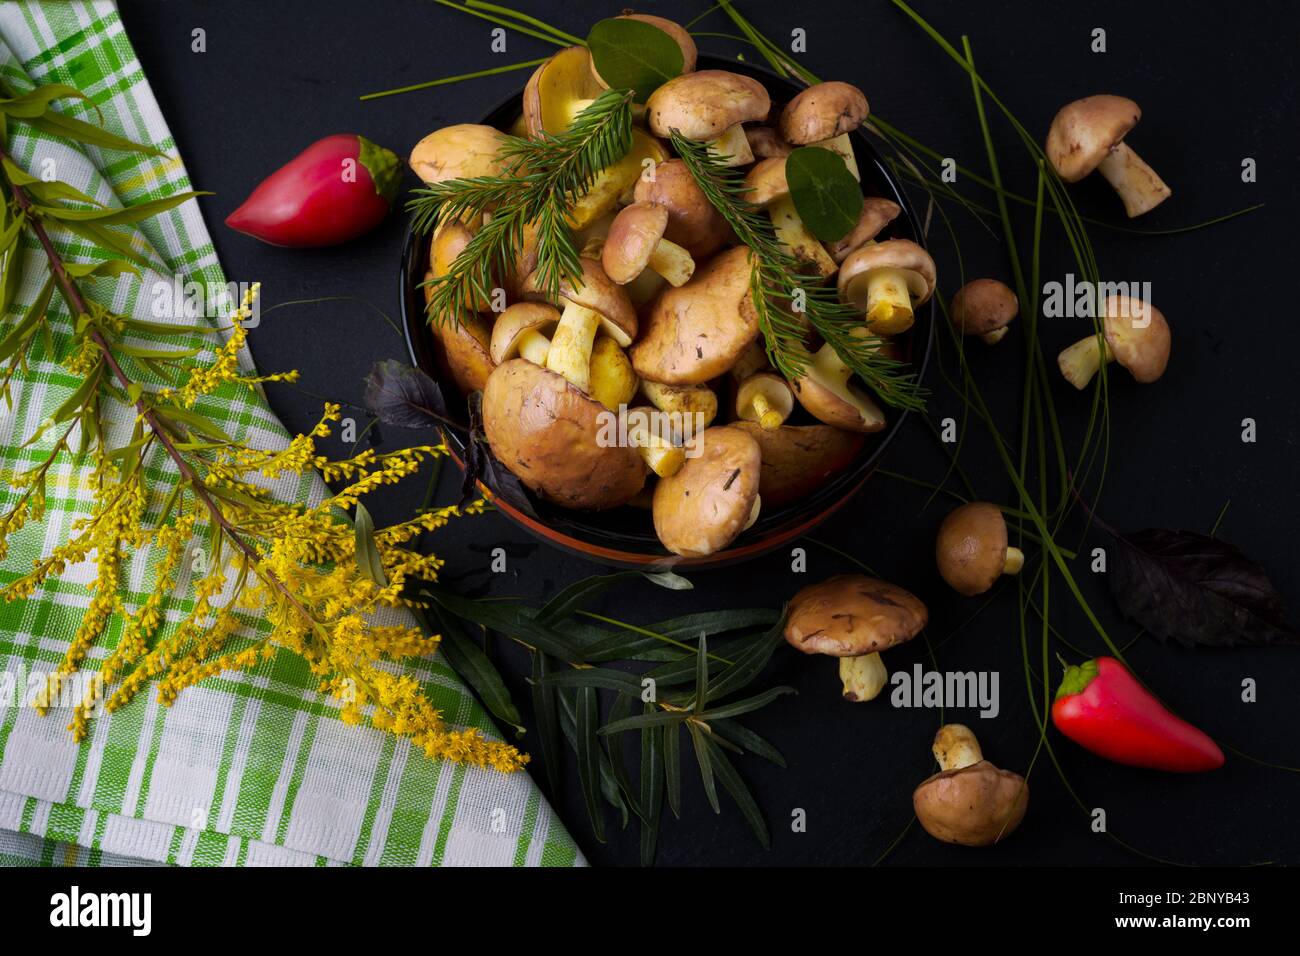 Bowl with forest picking mushrooms, green checkered napkin and wild grass on the black background, top view. Vegetarian healthy food concept Stock Photo